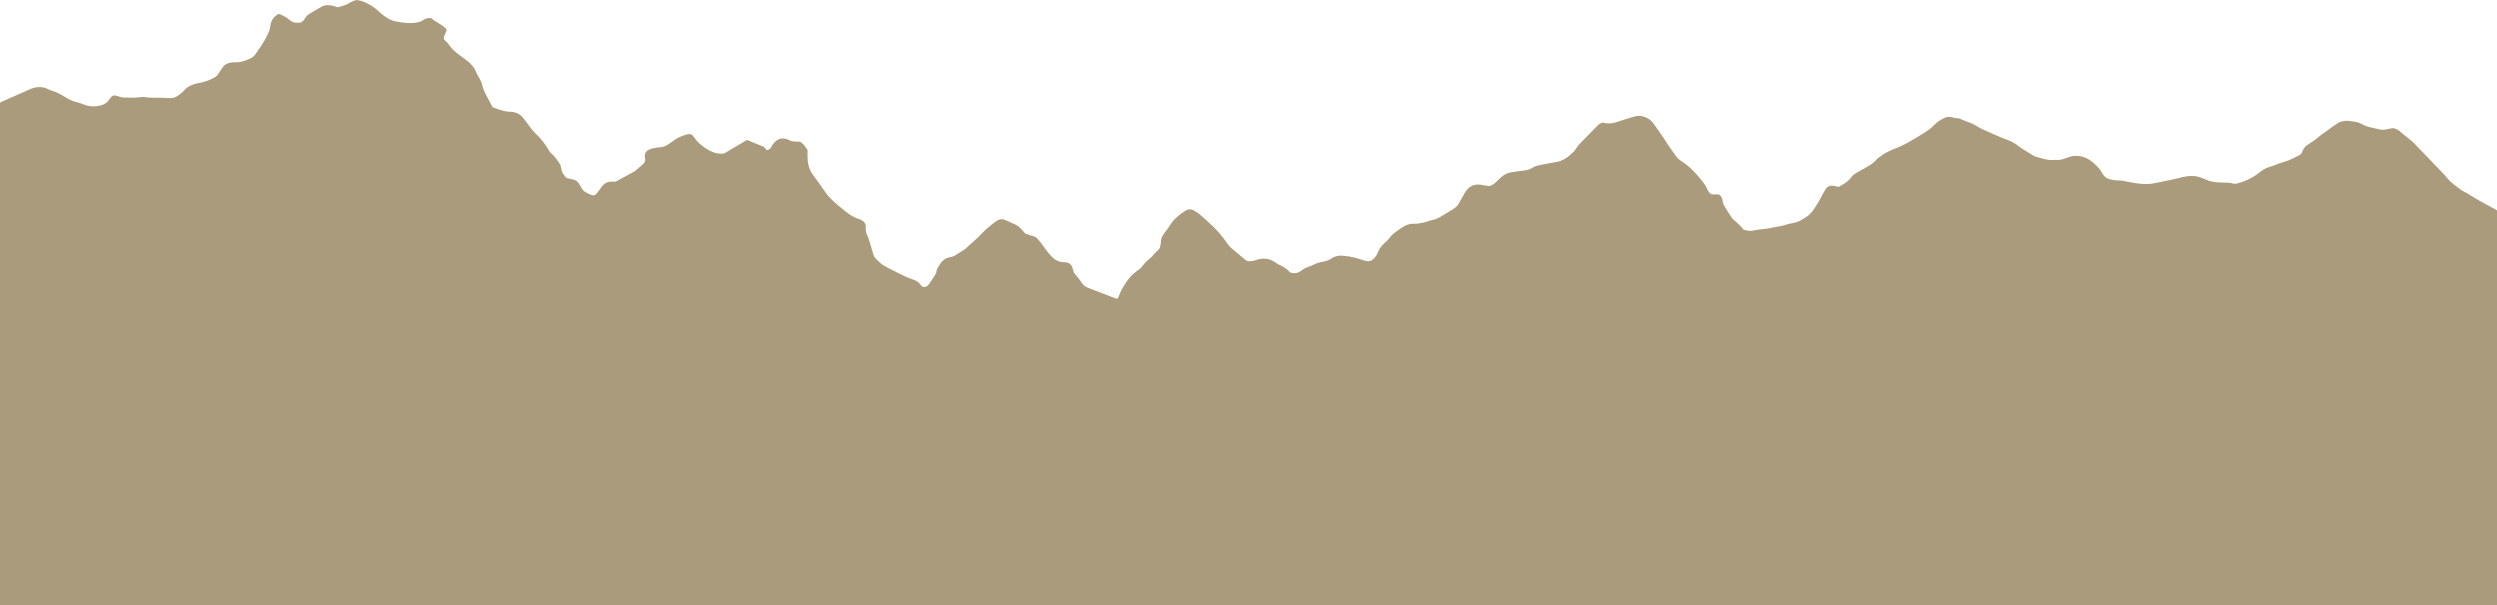 Mountain Silhouettes 8brown - Mountain (2497x605), Png Download